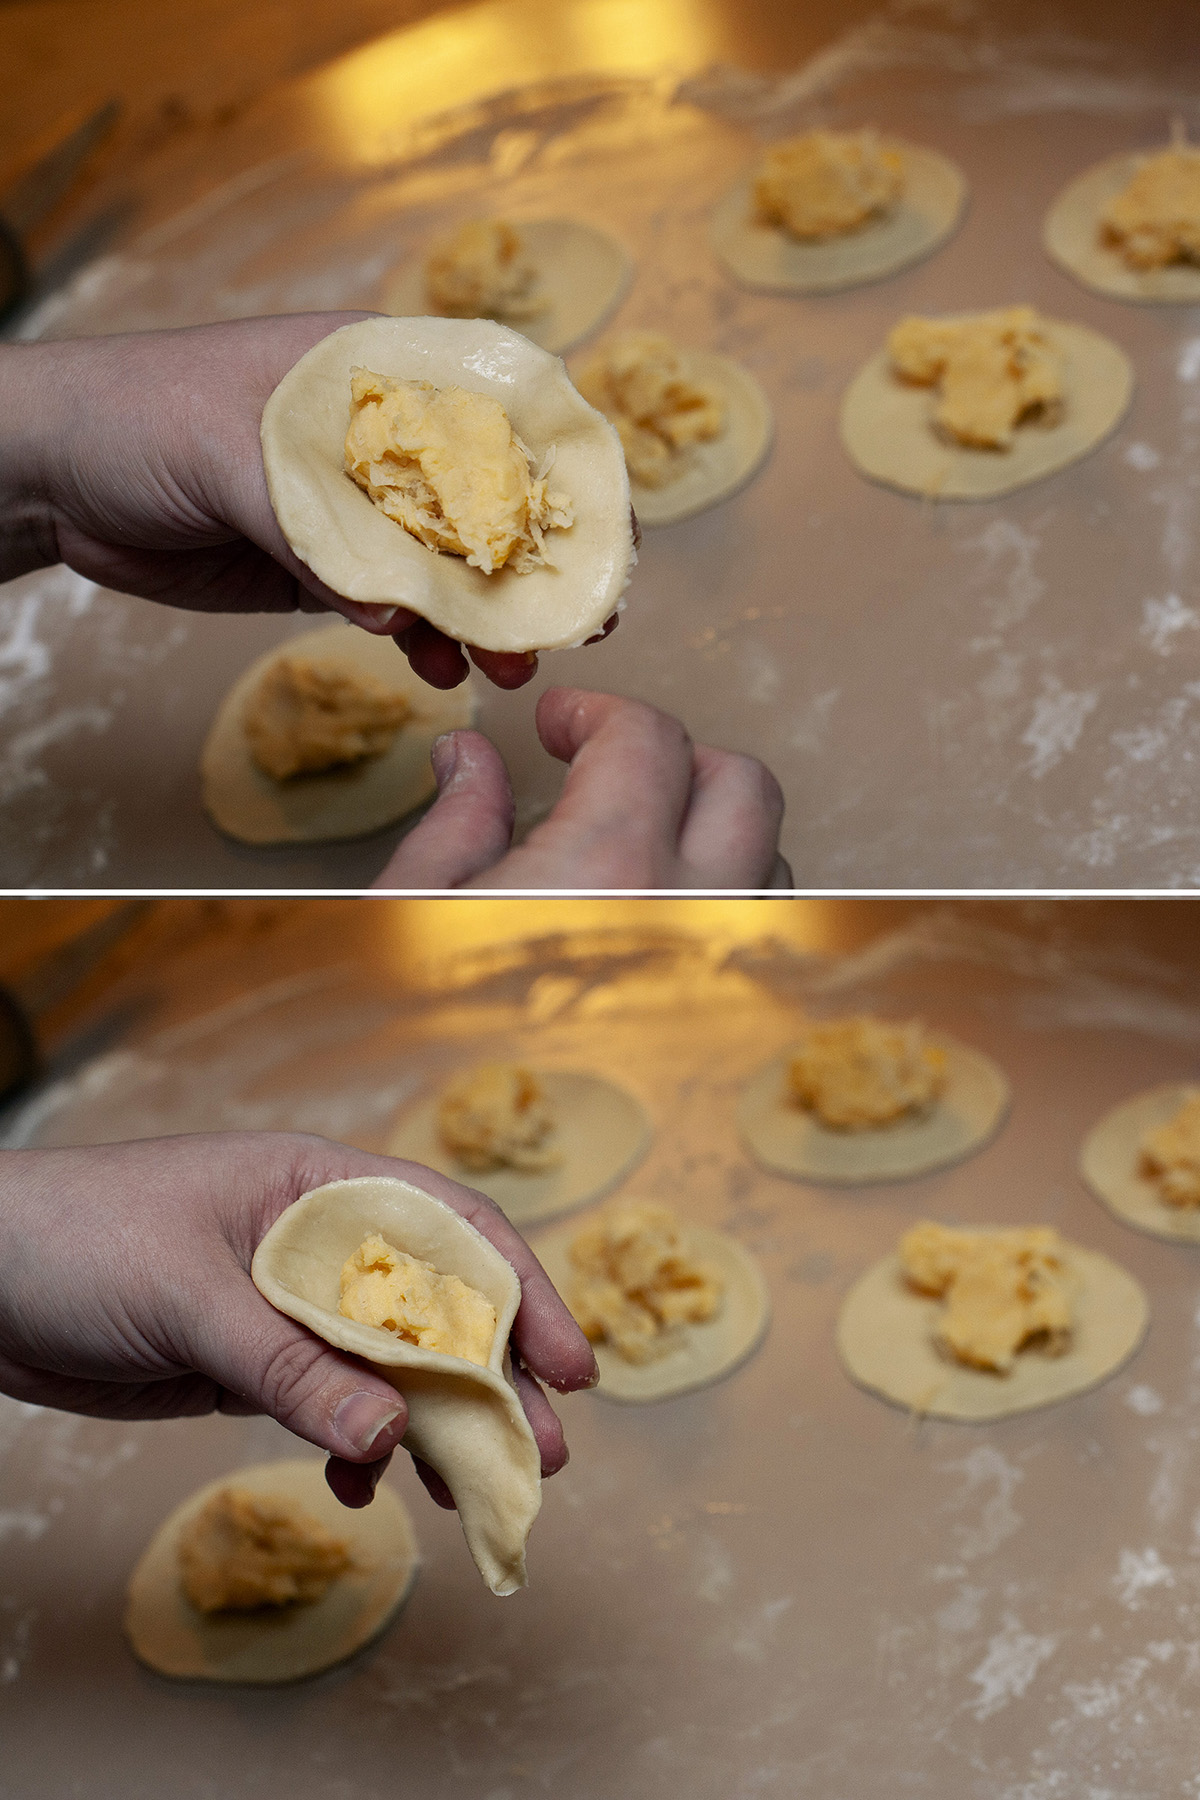 A two part image showing a gluten free pierogi being formed, as described.